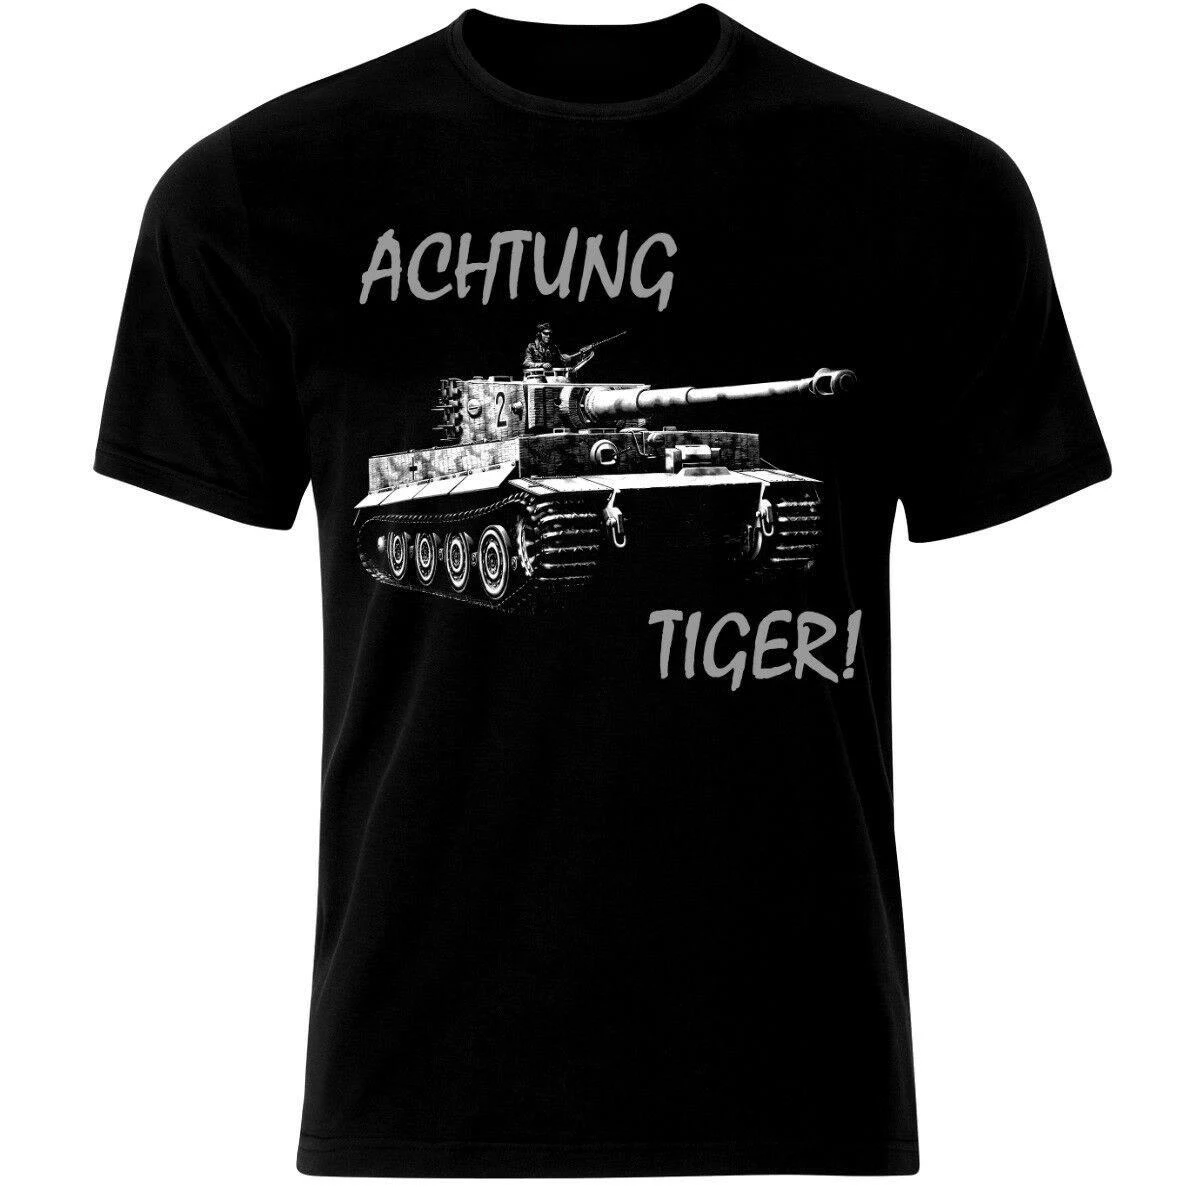 

Achtung Tiger- WWII German Tiger Tank Wehrmacht Panzer T Shirt. Short Sleeve 100% Cotton Casual T-shirts Loose Top Size S-3XL